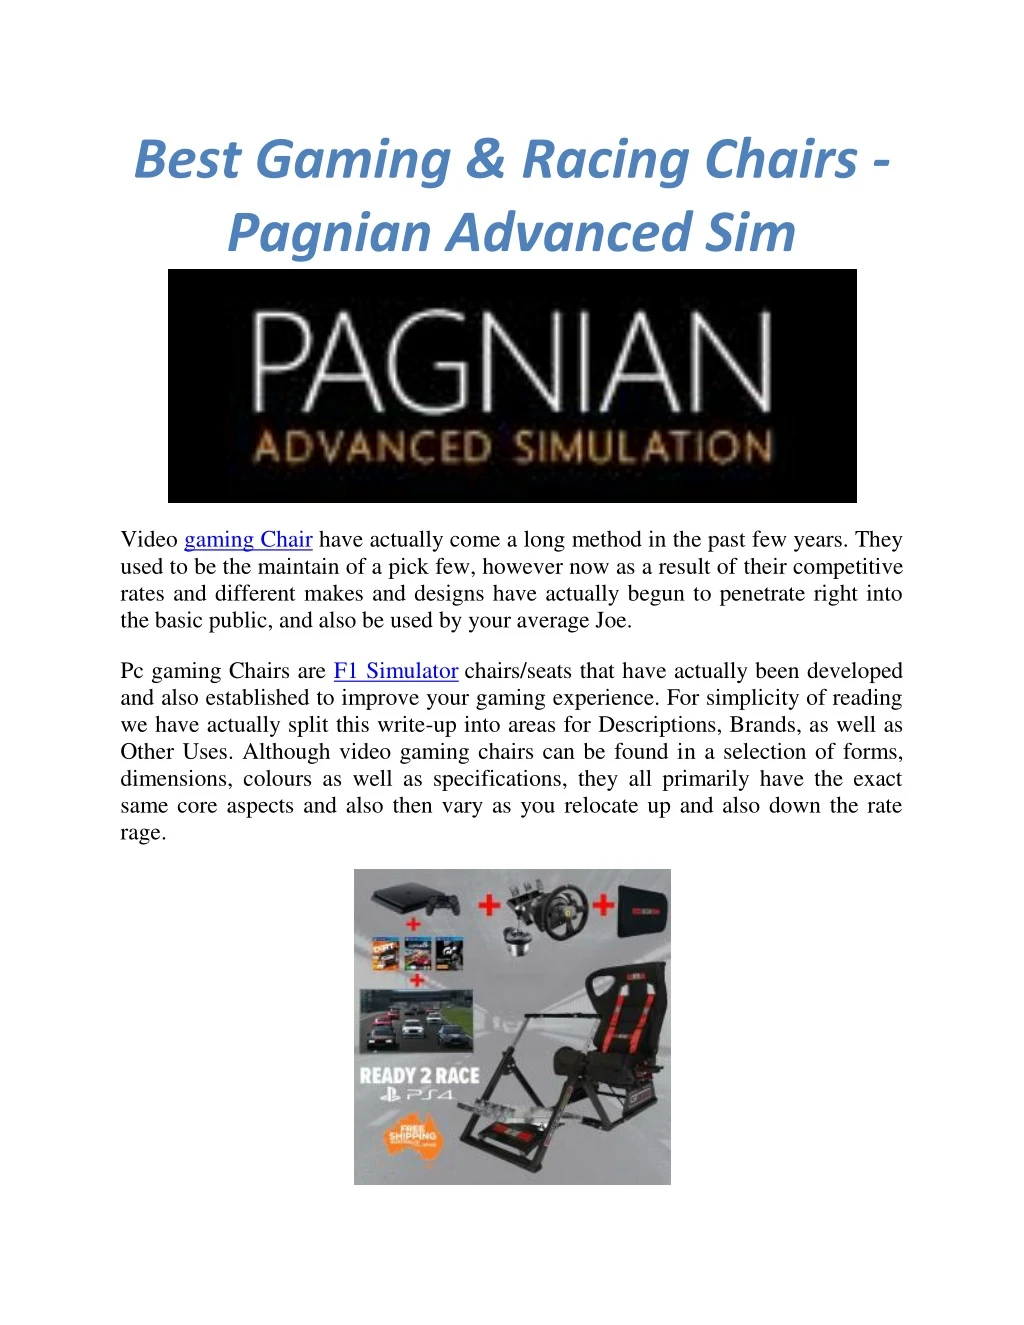 best gaming racing chairs pagnian advanced sim